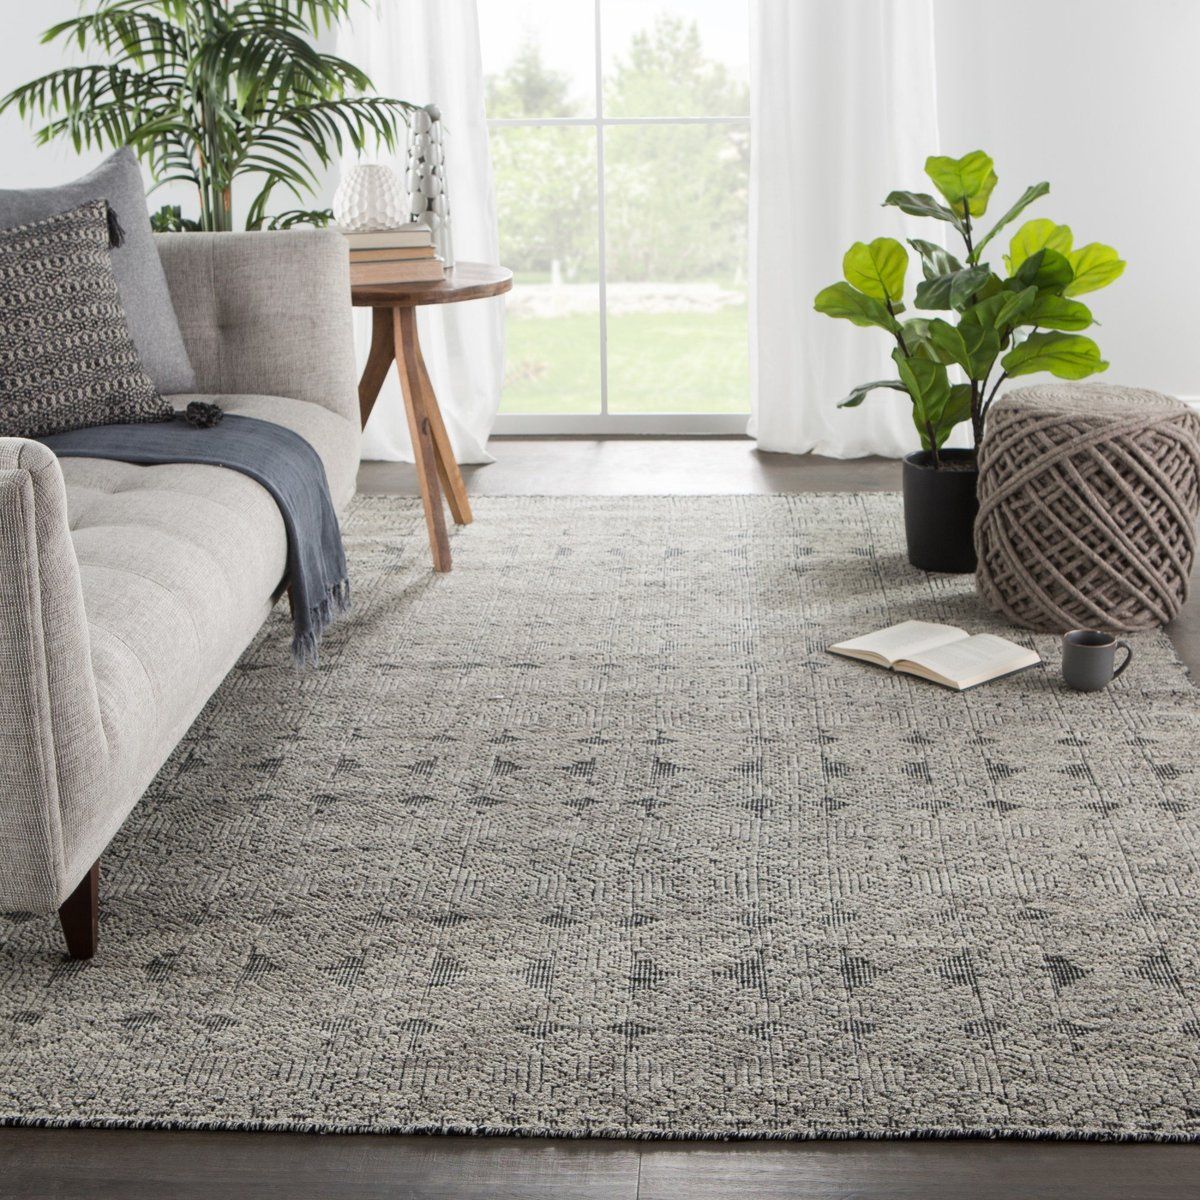 33 Shades Of Grey Living Room Ideas | Rugs Direct Inside Gray Rugs (View 12 of 15)